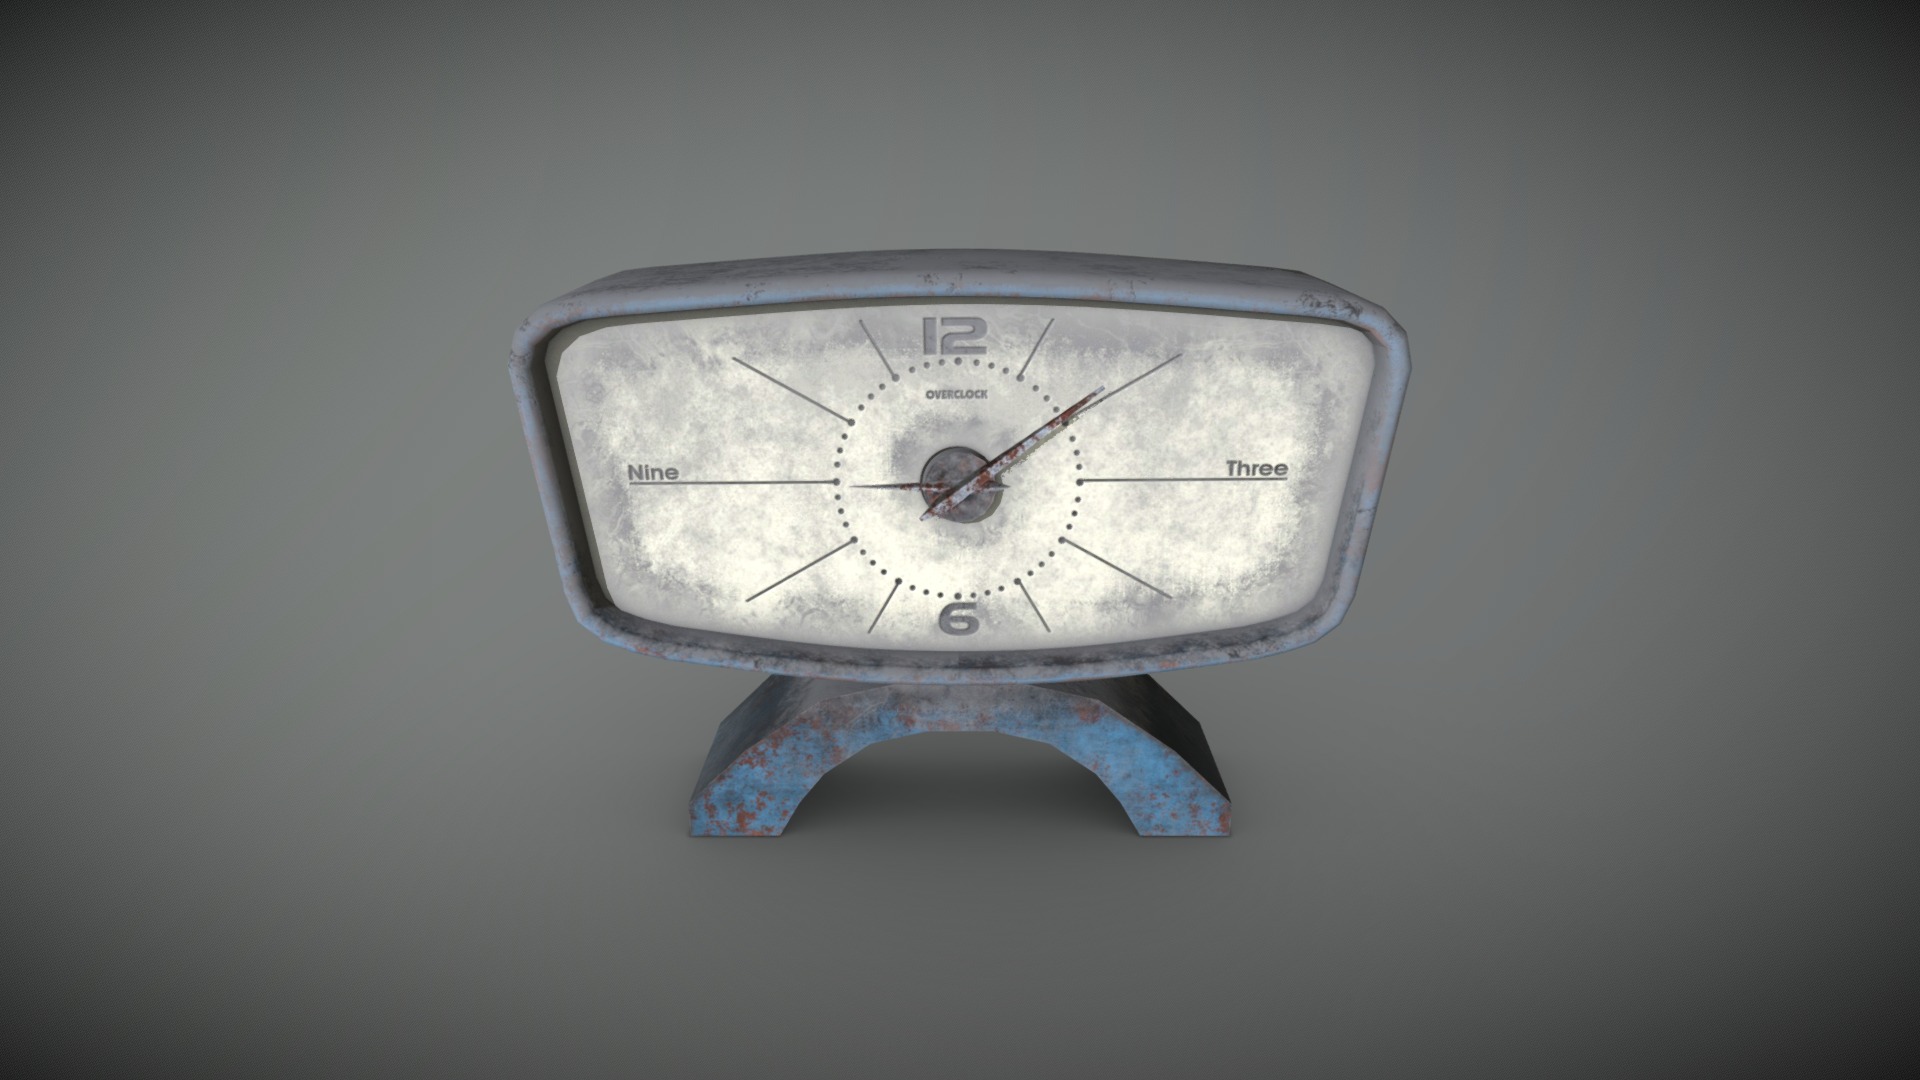 3D model Dirty desktop clock 11 of 20 - This is a 3D model of the Dirty desktop clock 11 of 20. The 3D model is about a watch on a surface.